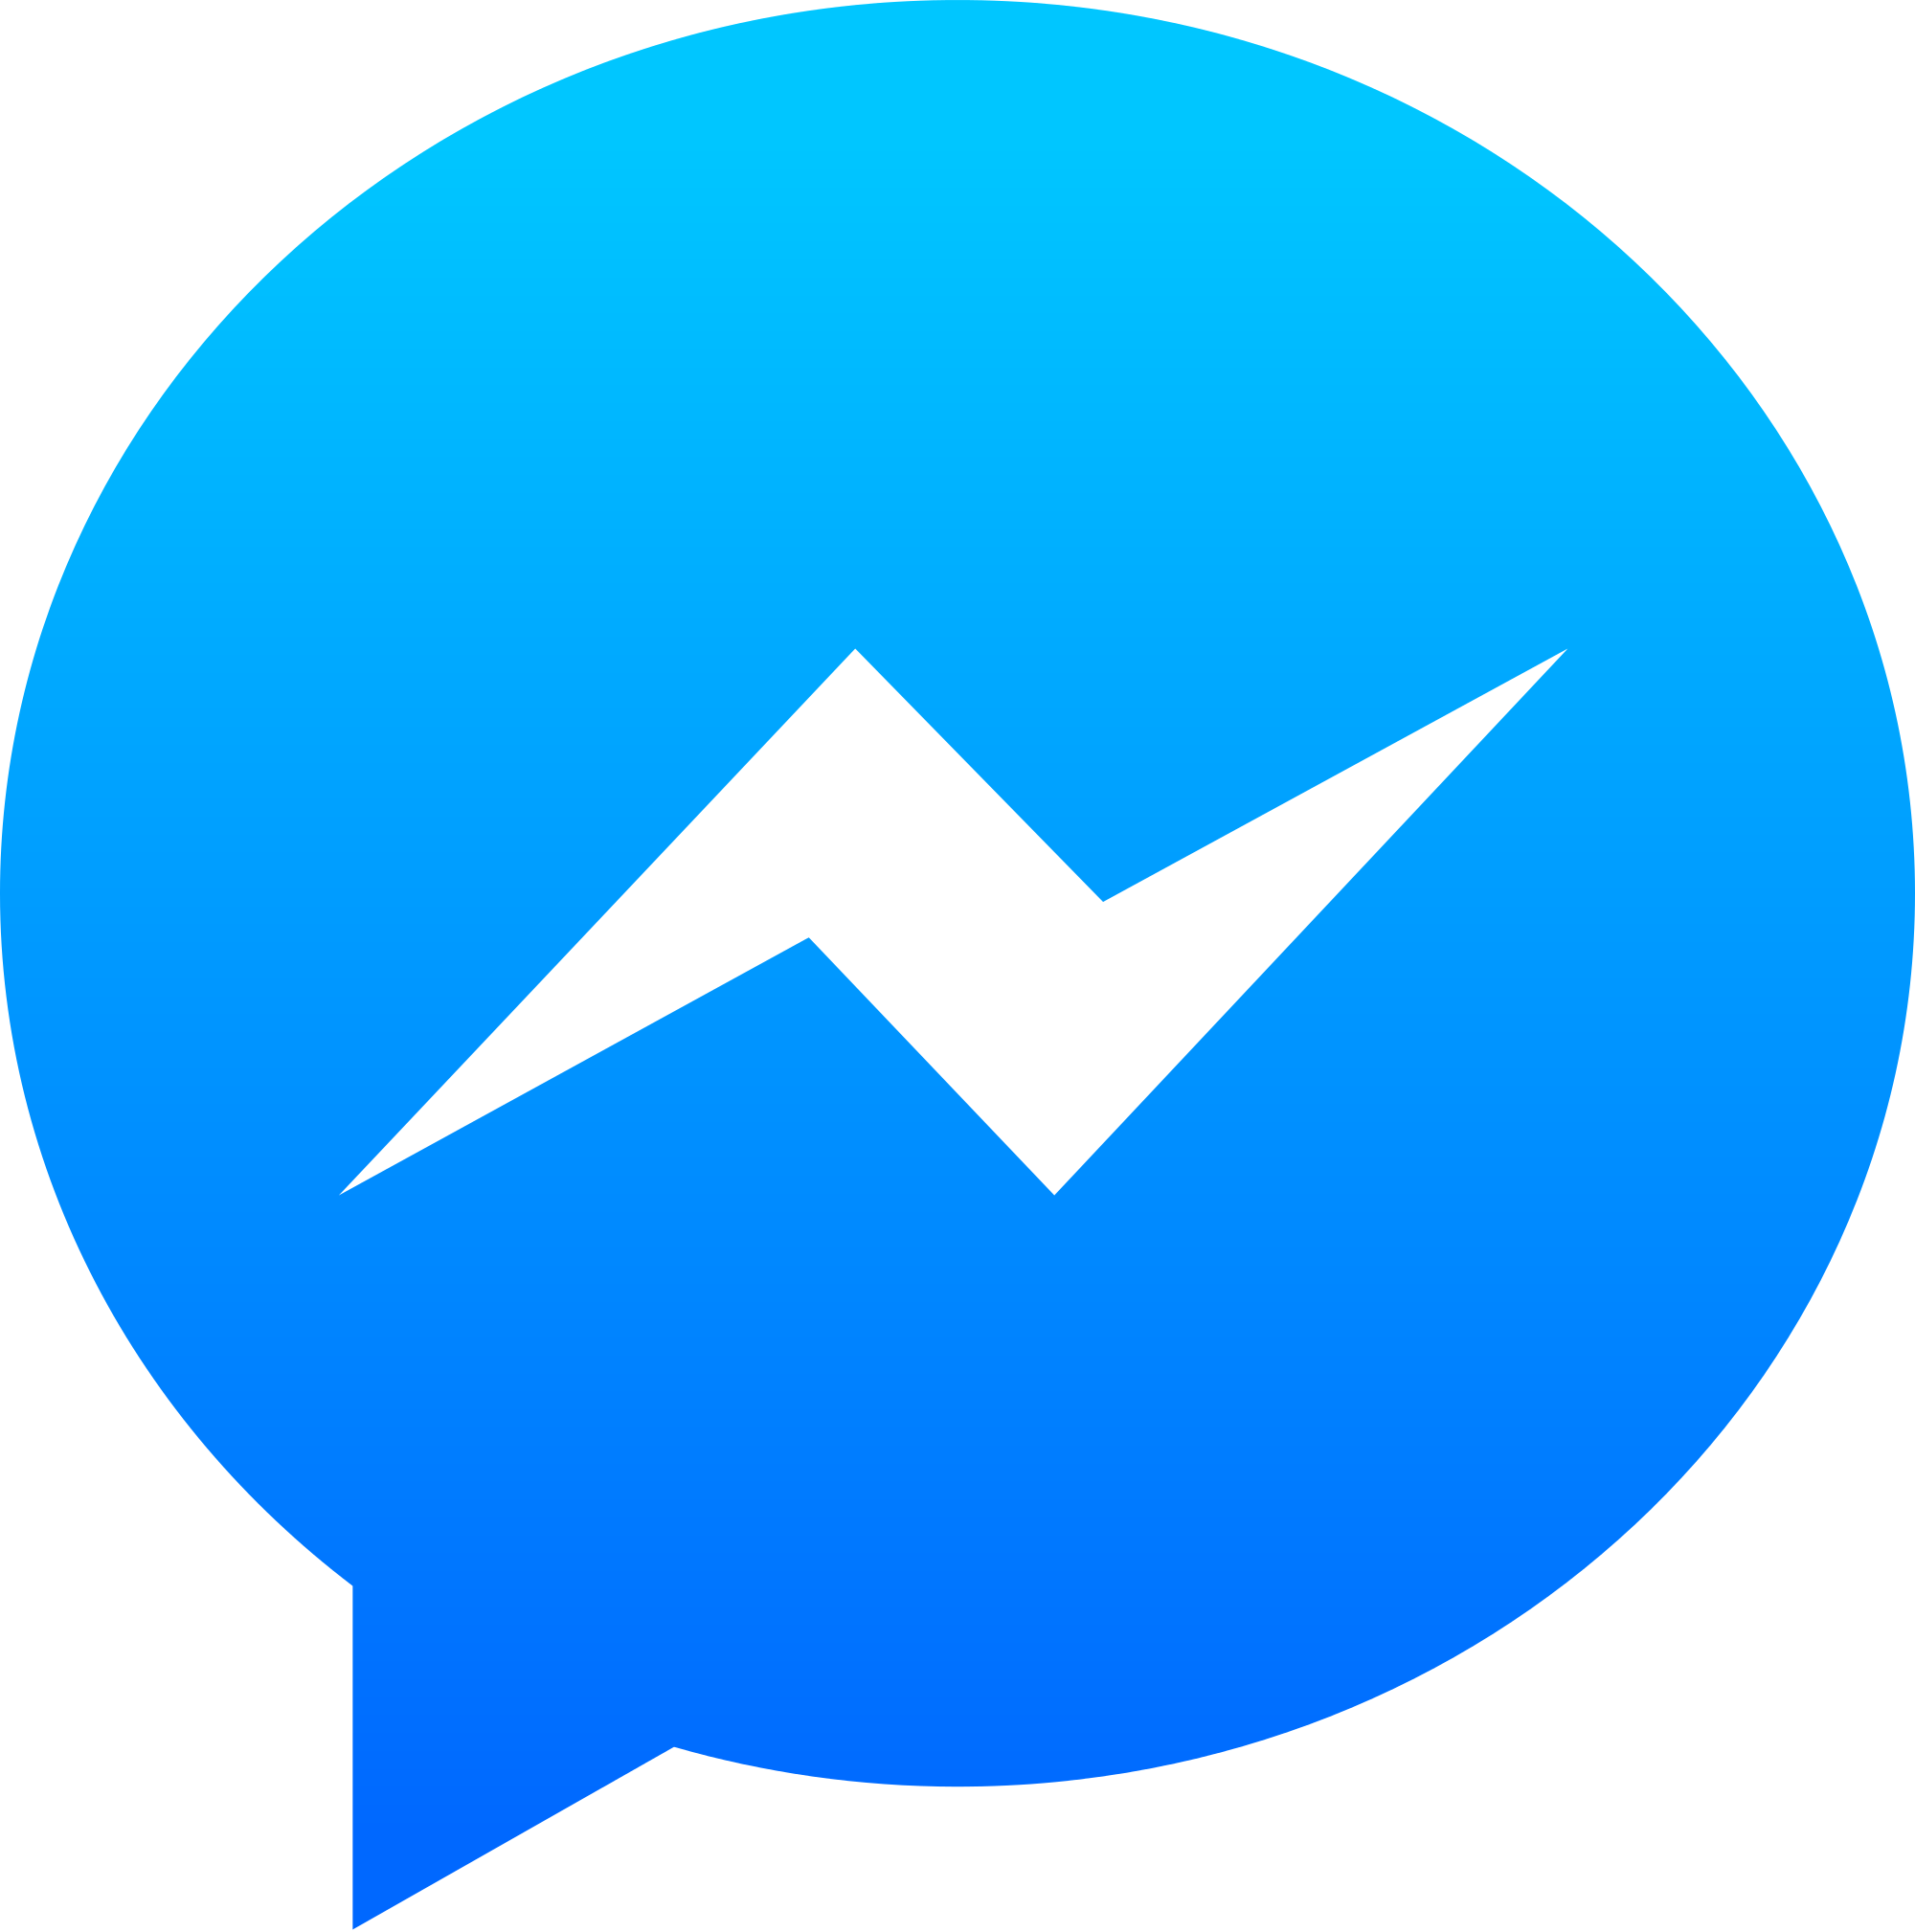 messenger tips & trick, Technology tips  and trick, Some important tips and tricks of Facebook Messenger